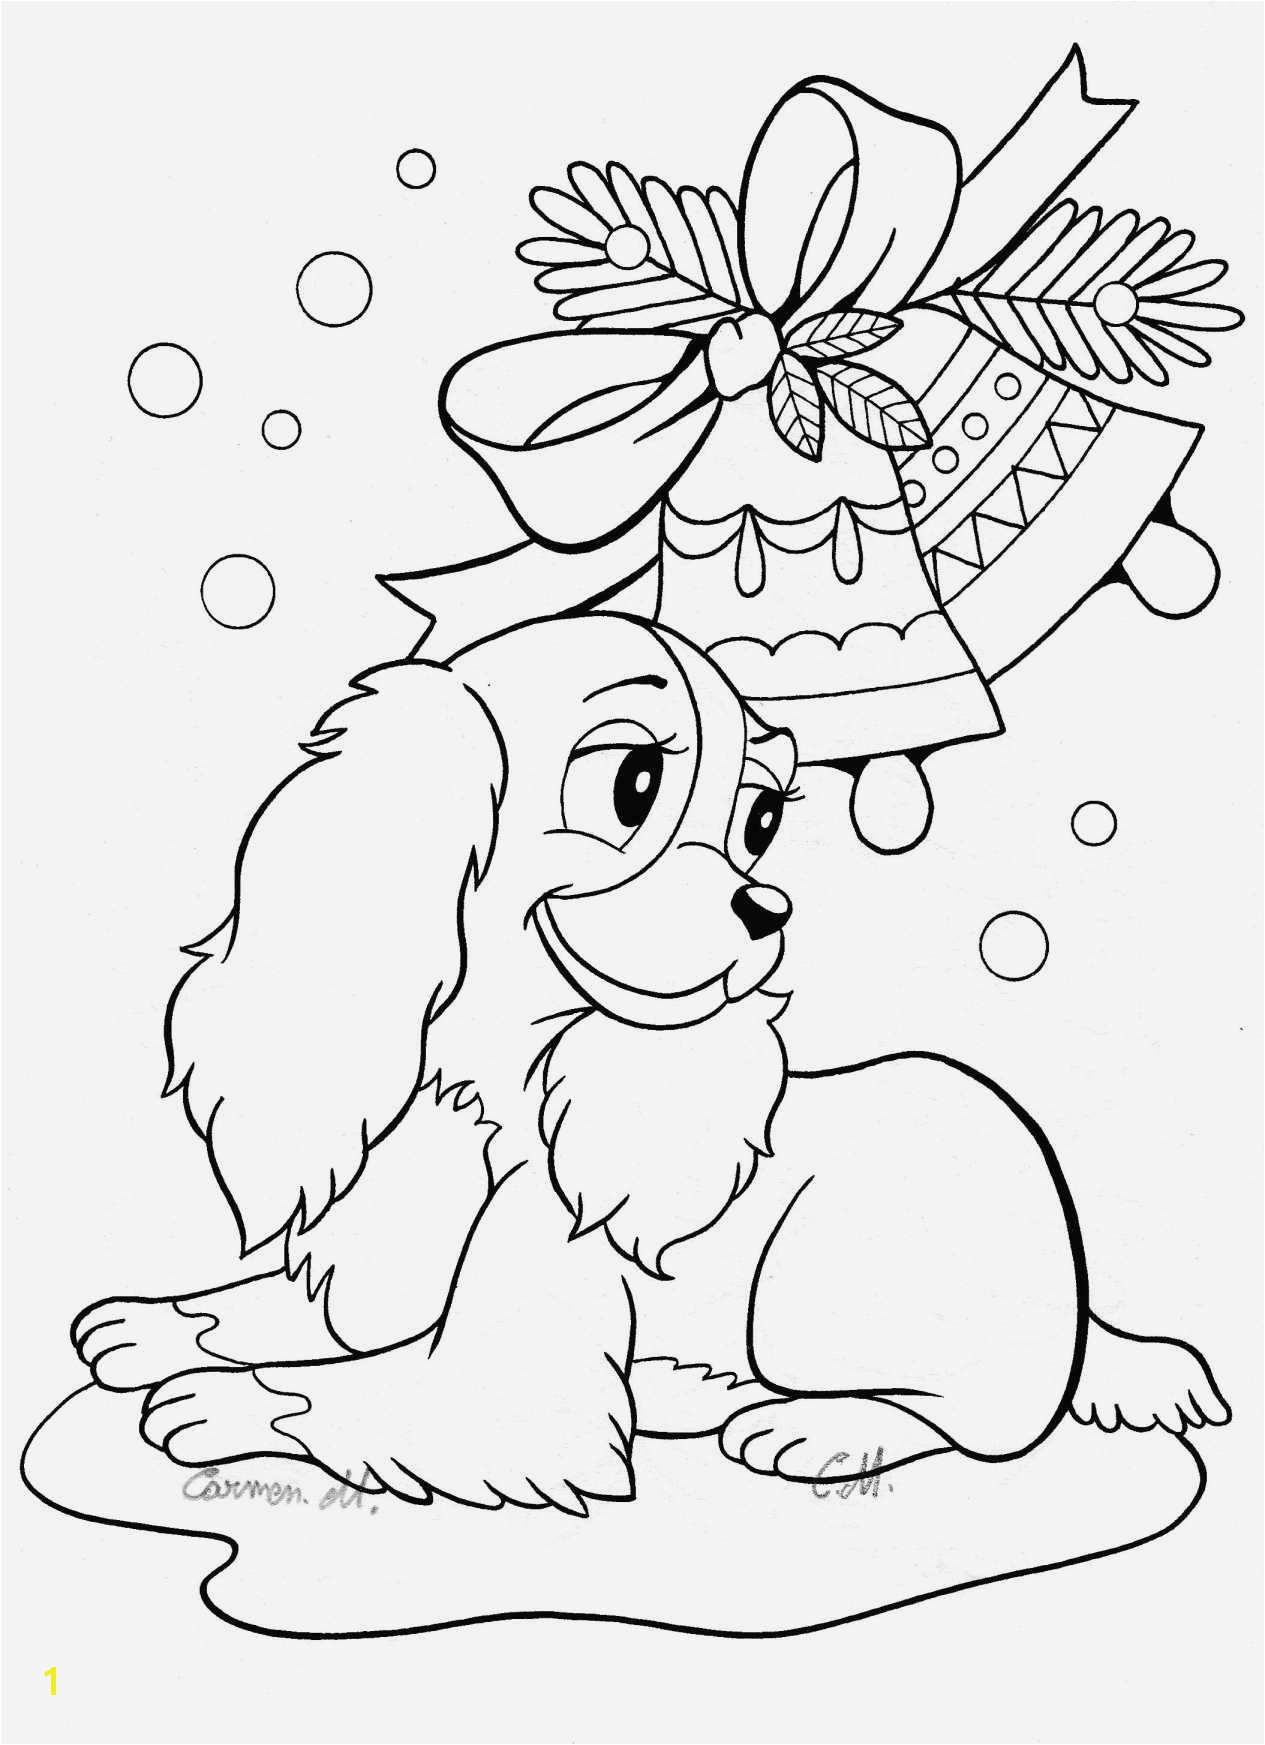 Printable Cute Puppy Coloring Pages Beautiful Coloring Pages Cute Puppies and Kittens